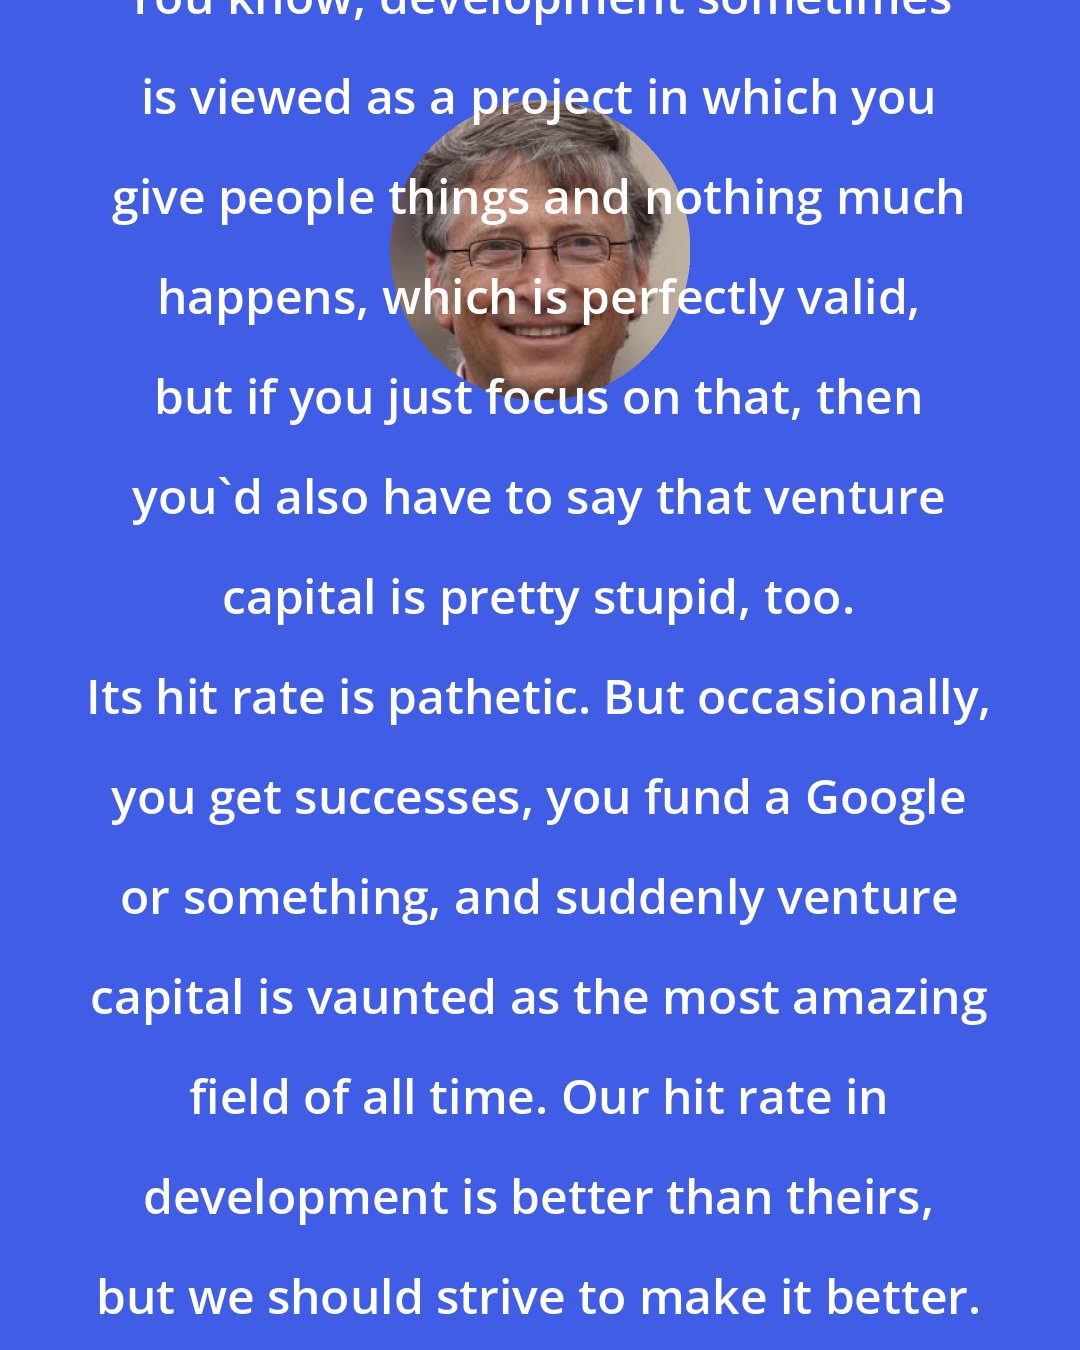 Bill Gates: You know, development sometimes is viewed as a project in which you give people things and nothing much happens, which is perfectly valid, but if you just focus on that, then you'd also have to say that venture capital is pretty stupid, too. Its hit rate is pathetic. But occasionally, you get successes, you fund a Google or something, and suddenly venture capital is vaunted as the most amazing field of all time. Our hit rate in development is better than theirs, but we should strive to make it better.